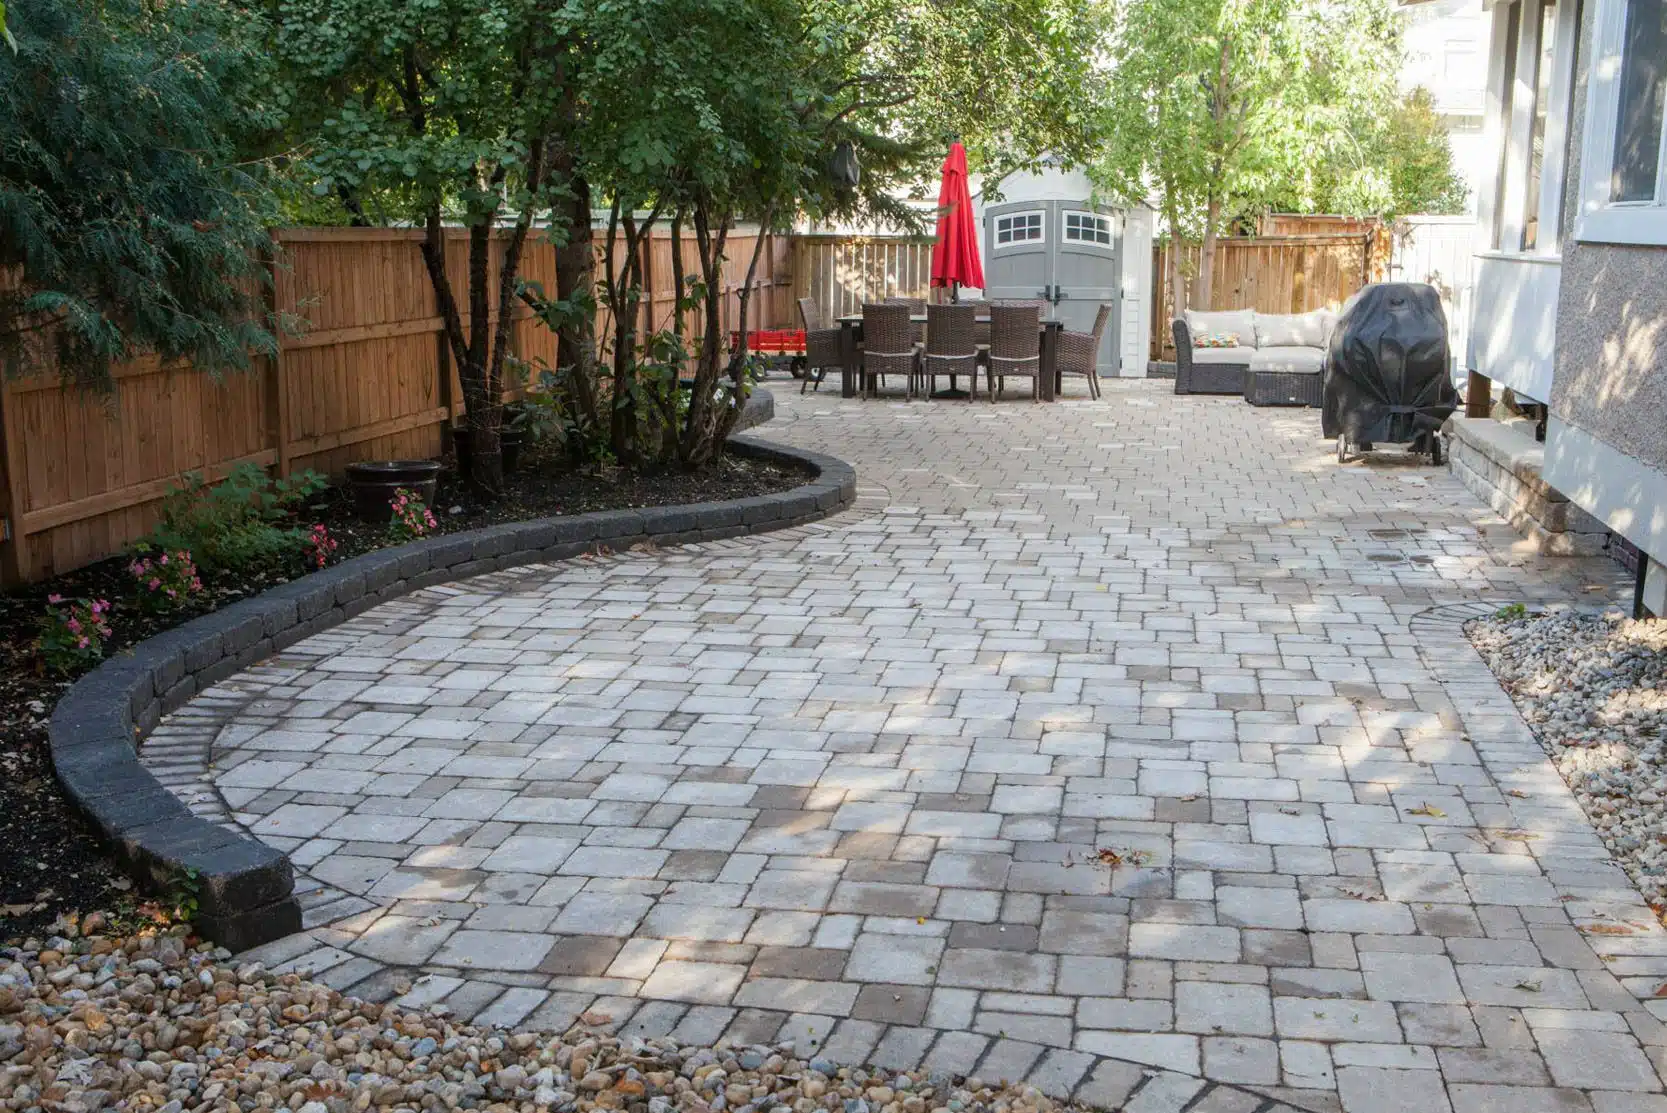 Backyard patio with stone pavers, a curved retaining wall, and a dining area